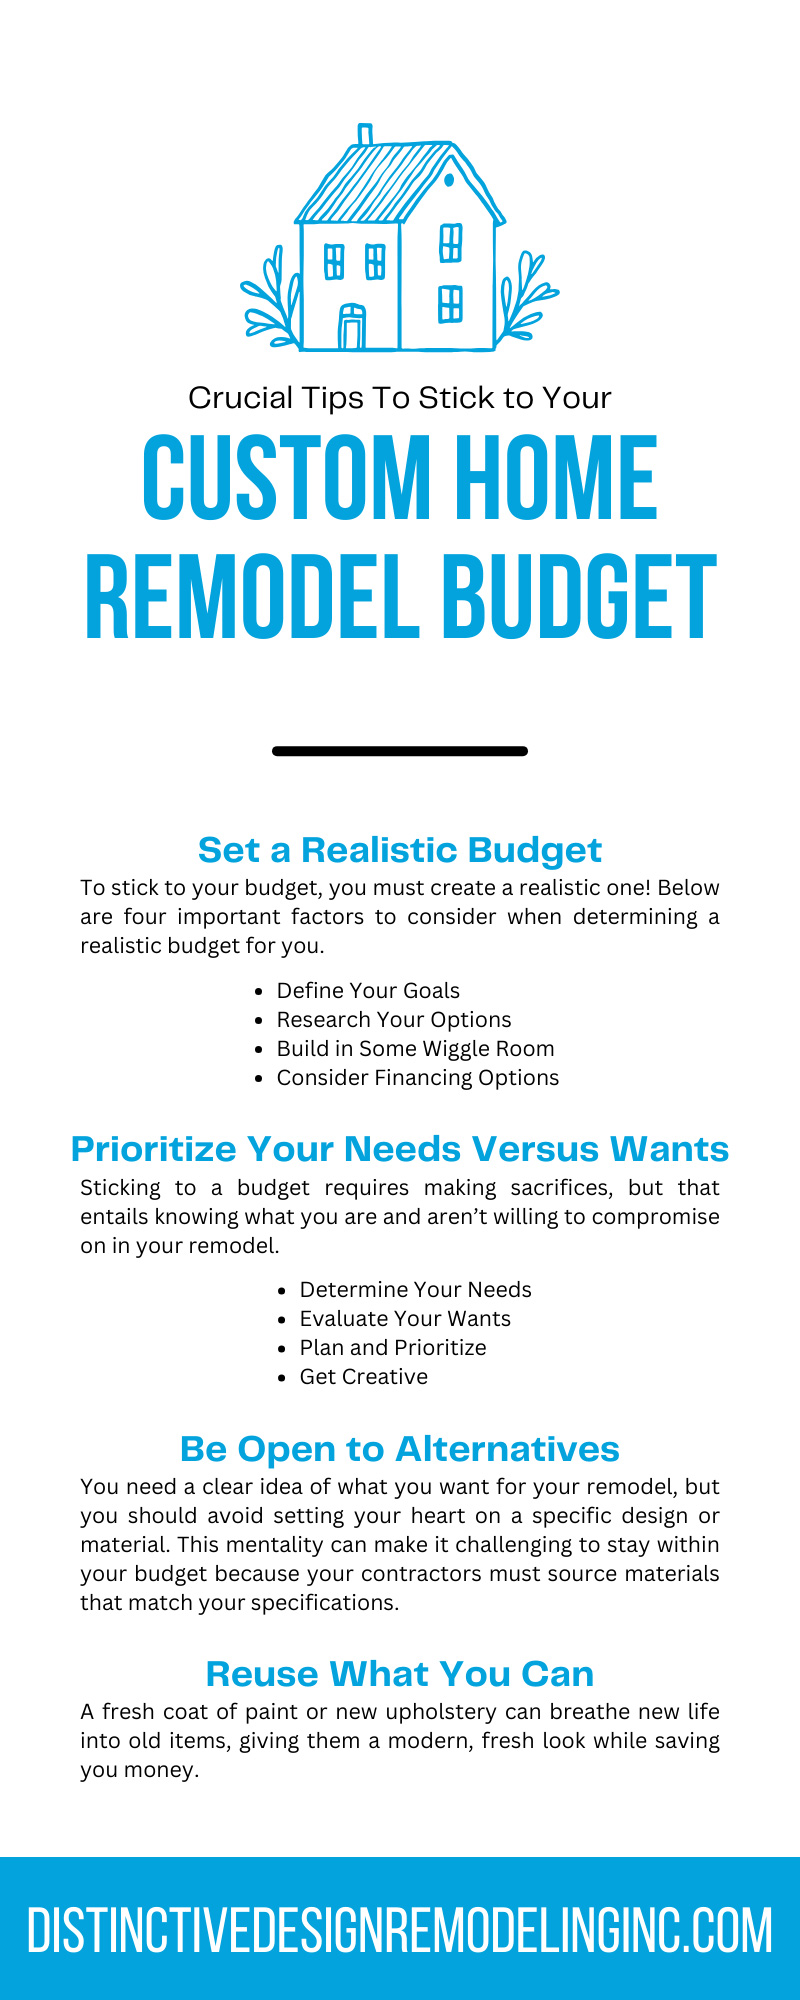 4 Crucial Tips To Stick to Your Custom Home Remodel Budget